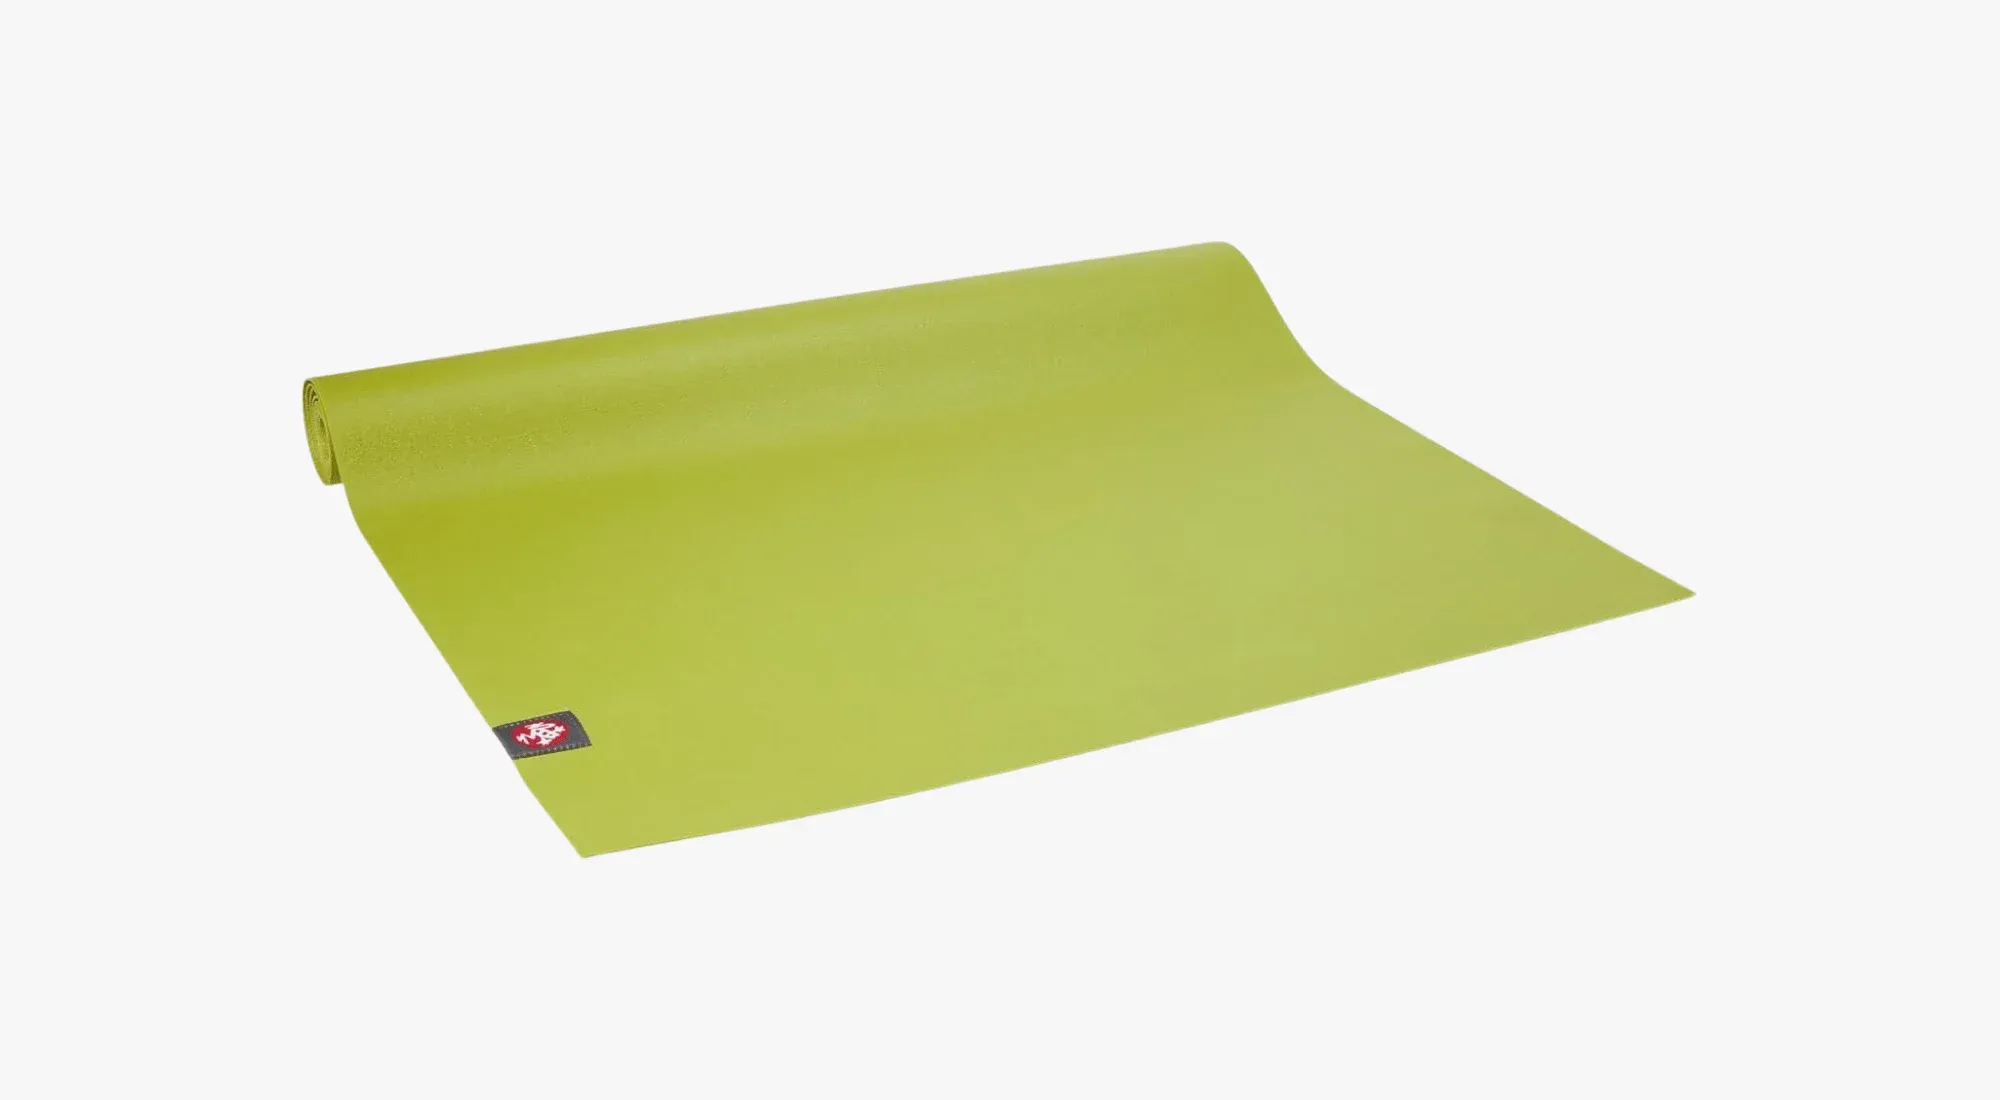 Buy Yoga Mat 2 in 1 Towel and mat Combination Eco Friendly Unique